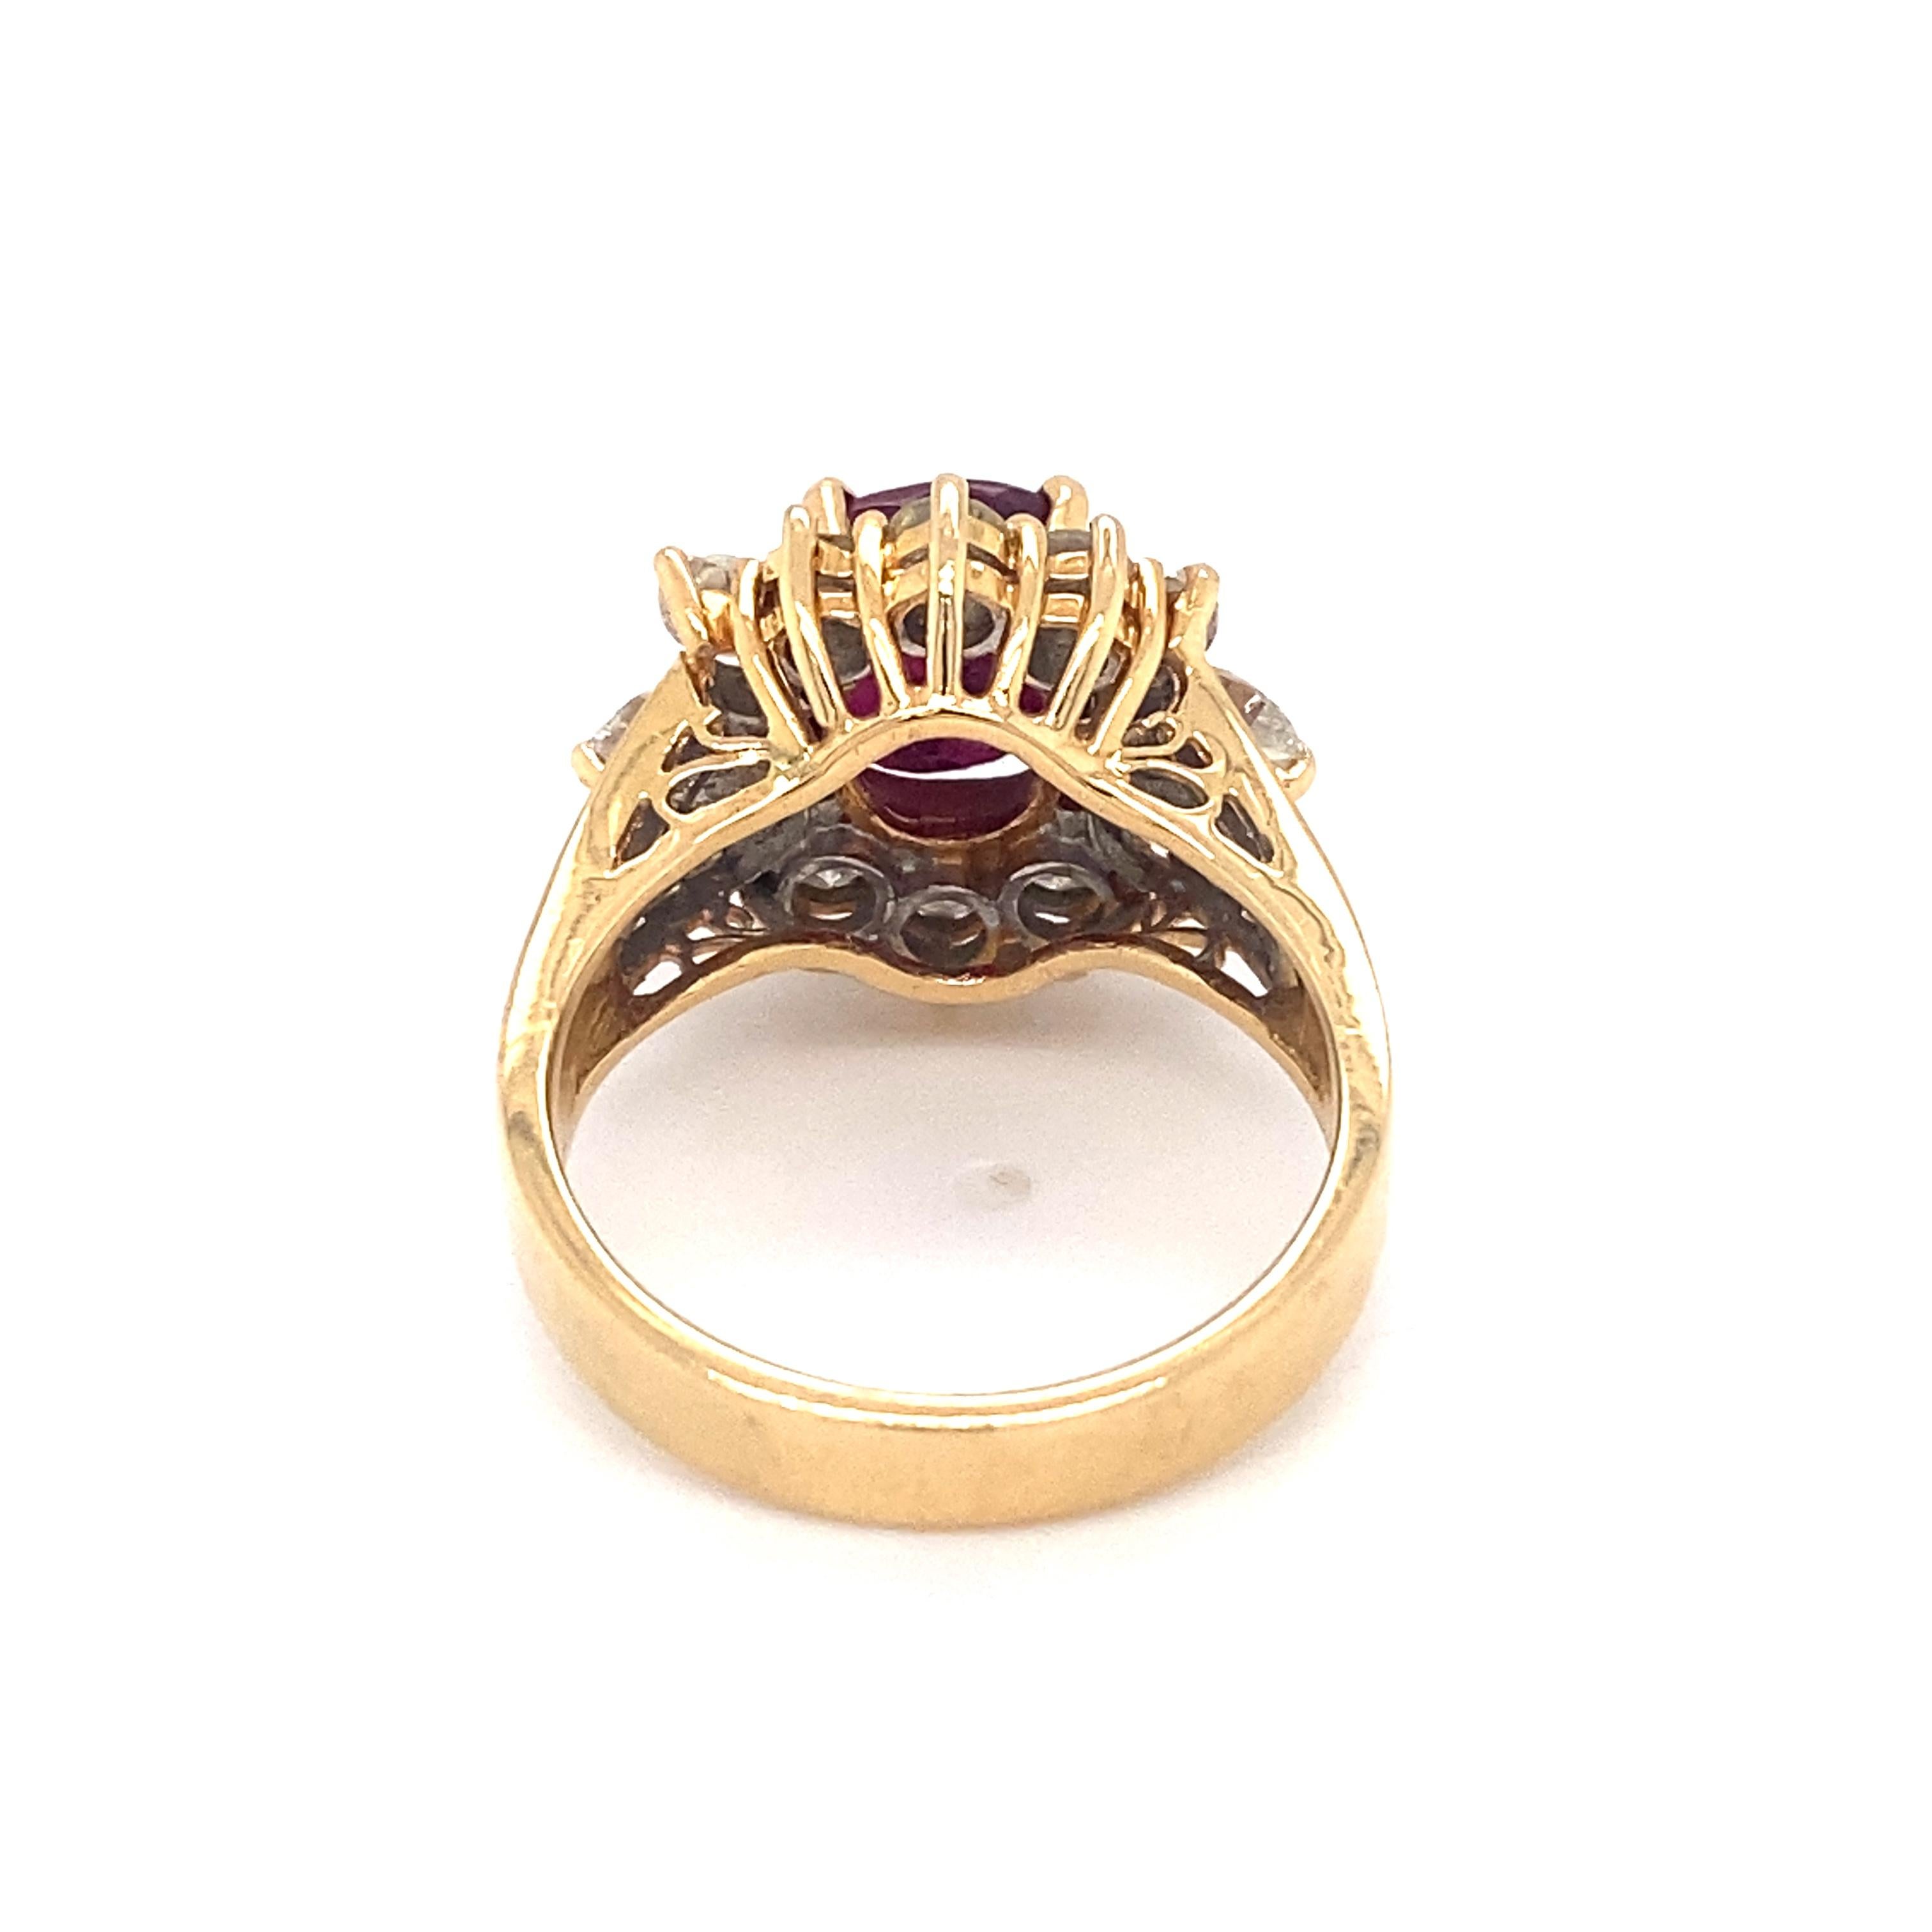 Item Details: This ring by Le Vian features a center cushion cut Thailand ruby and accent diamonds. Ruby Origin Report GIA #6224536574

Circa: 2000s
Metal Type: 18k gold
Weight: 8.7g
Size: US 7.5, resizable